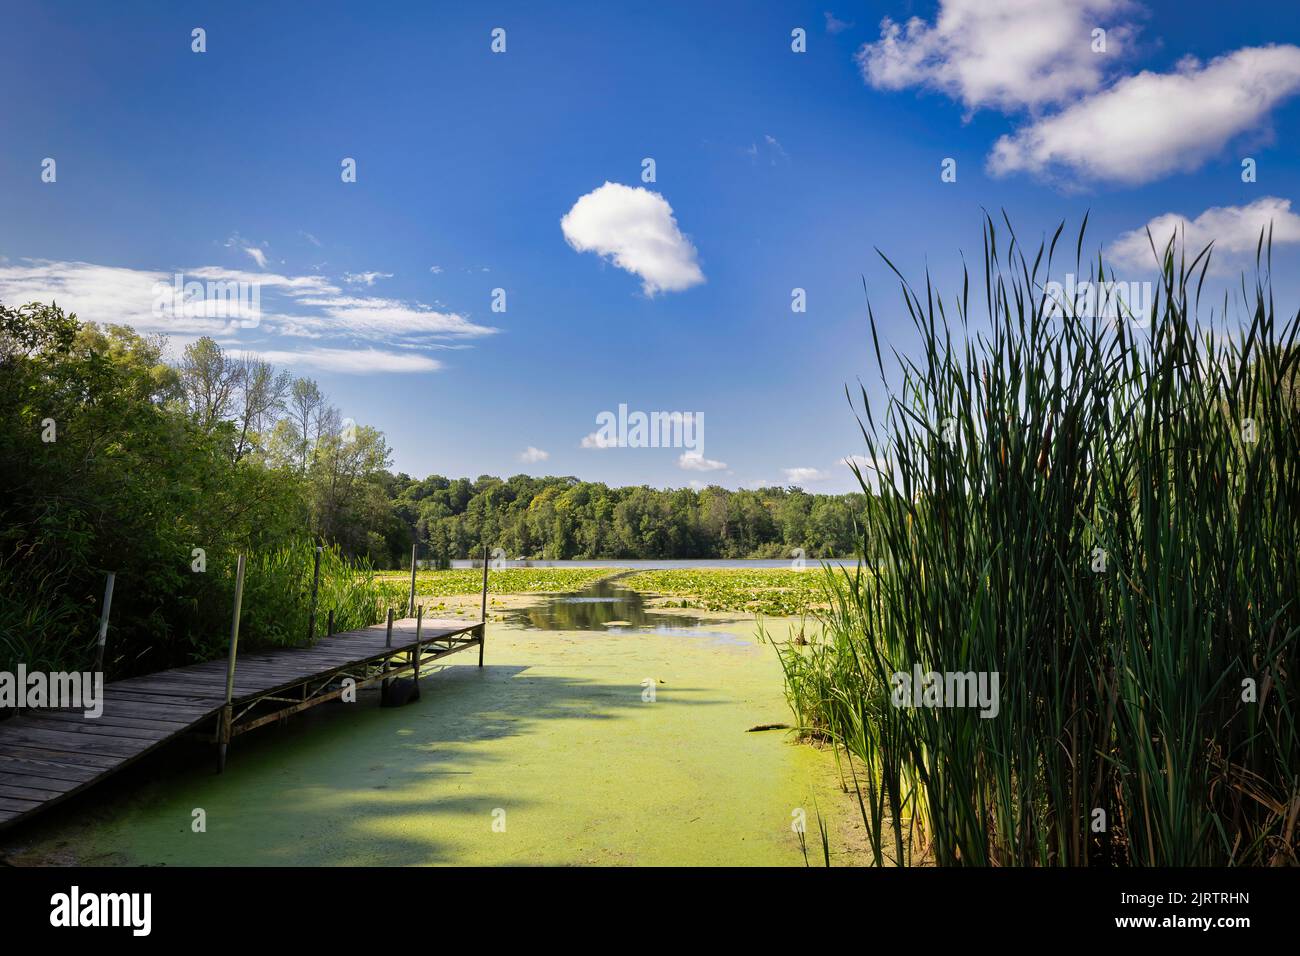 A sunny day by the public dock at Hartlaub Lake, covered in duckweed, near Manitowoc, Wisconsin. Stock Photo